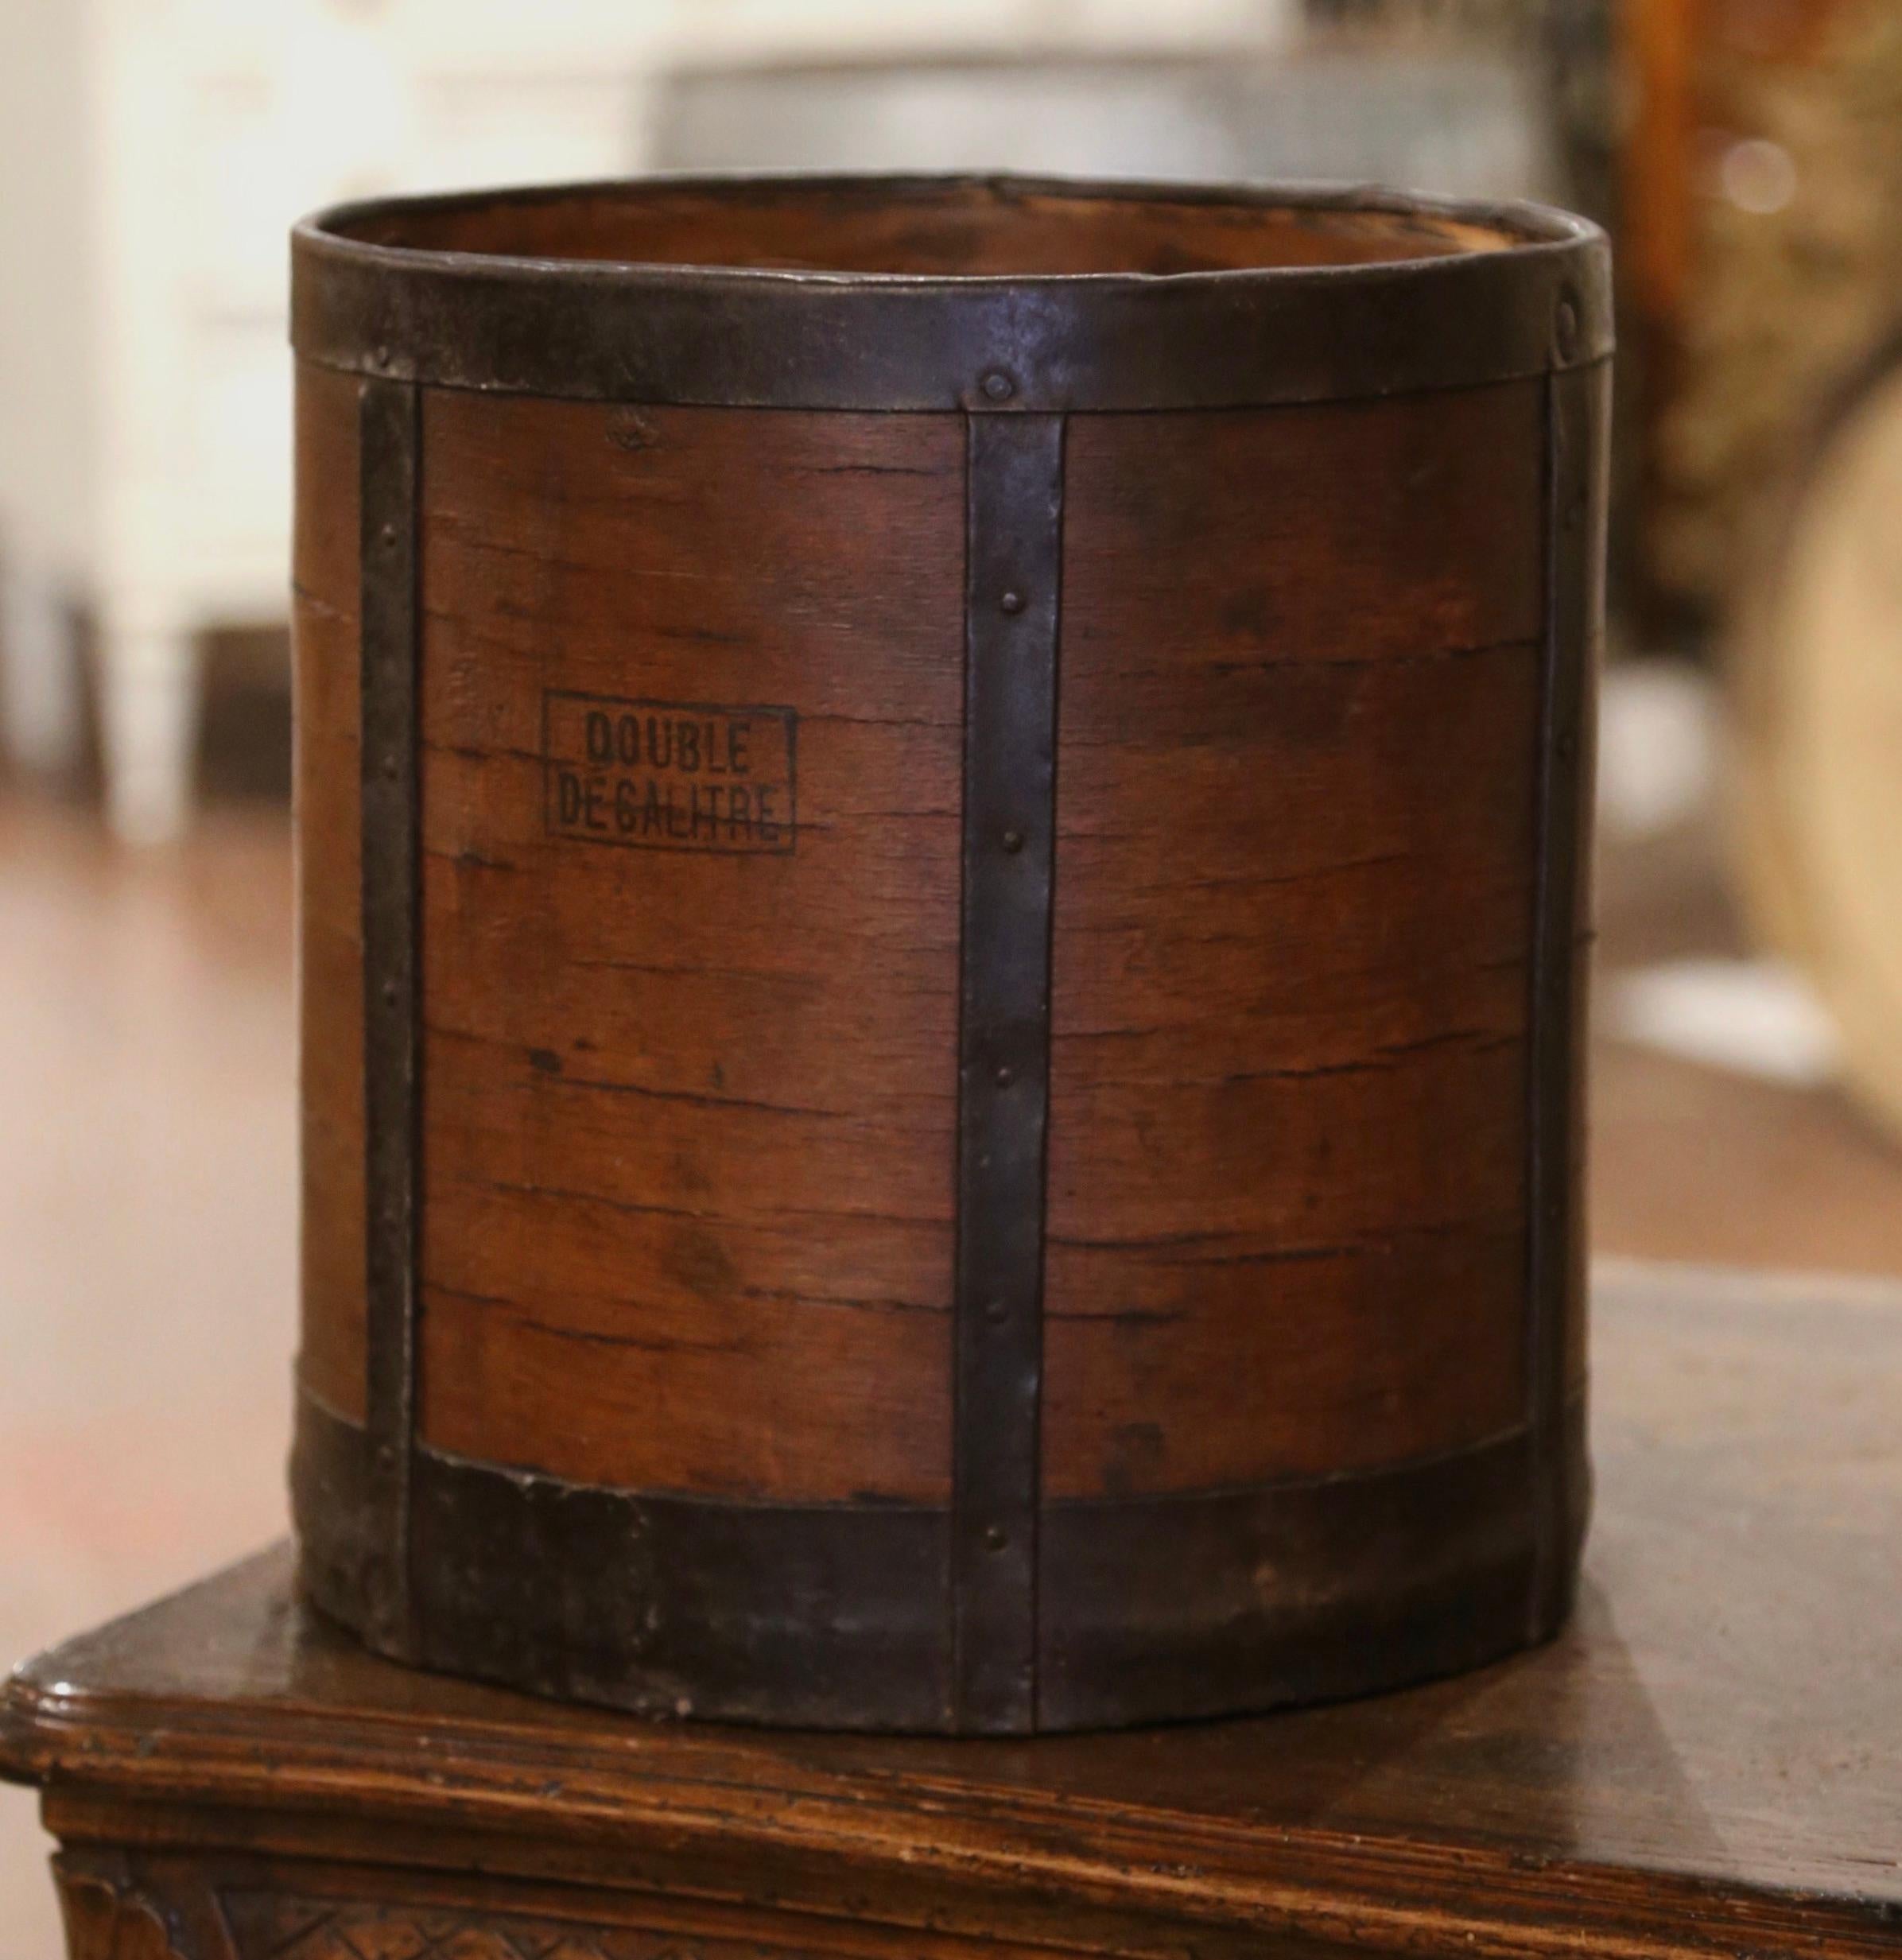 This antique grain measuring recipient was crafted in France, circa 1870. The bucket features metal straps, forged nails on the outside and an inside iron handle. The basket is printed 